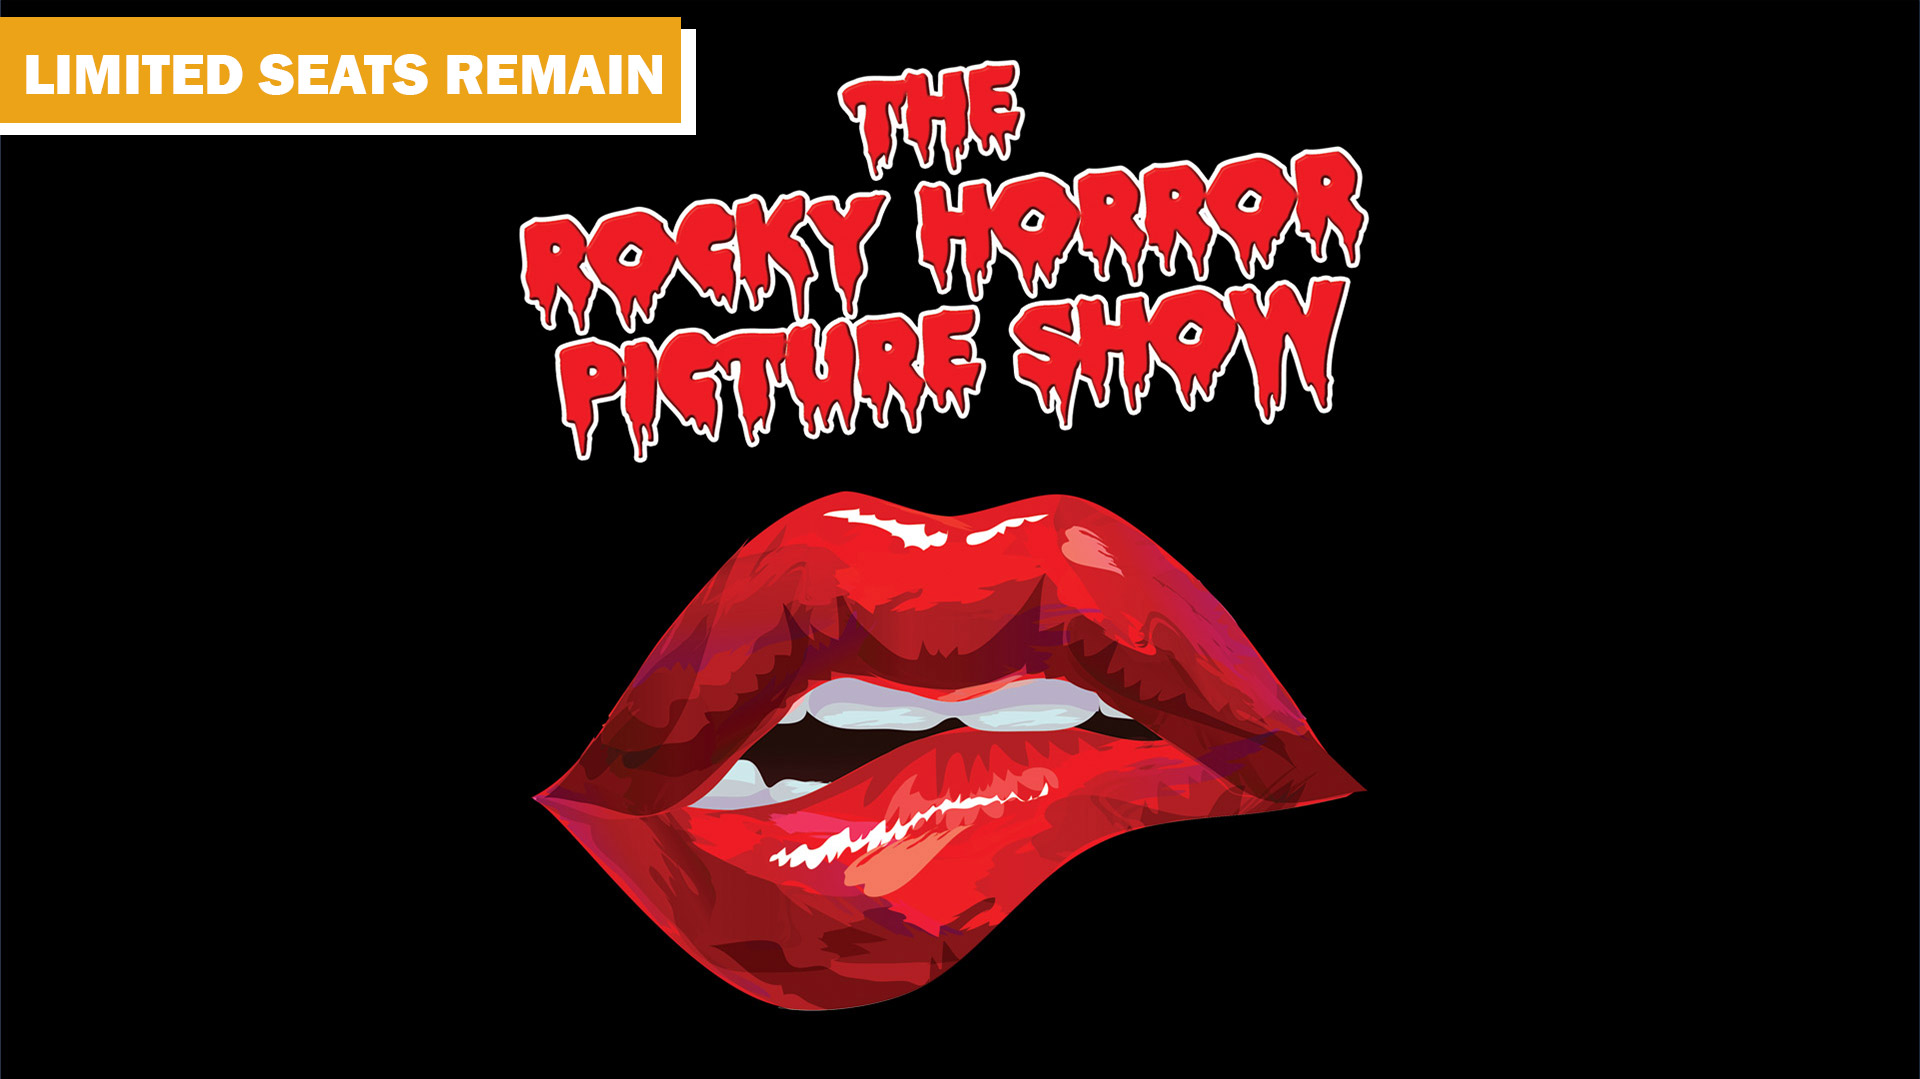 The Rocky Horror Picture Show - Limited Seats Remain